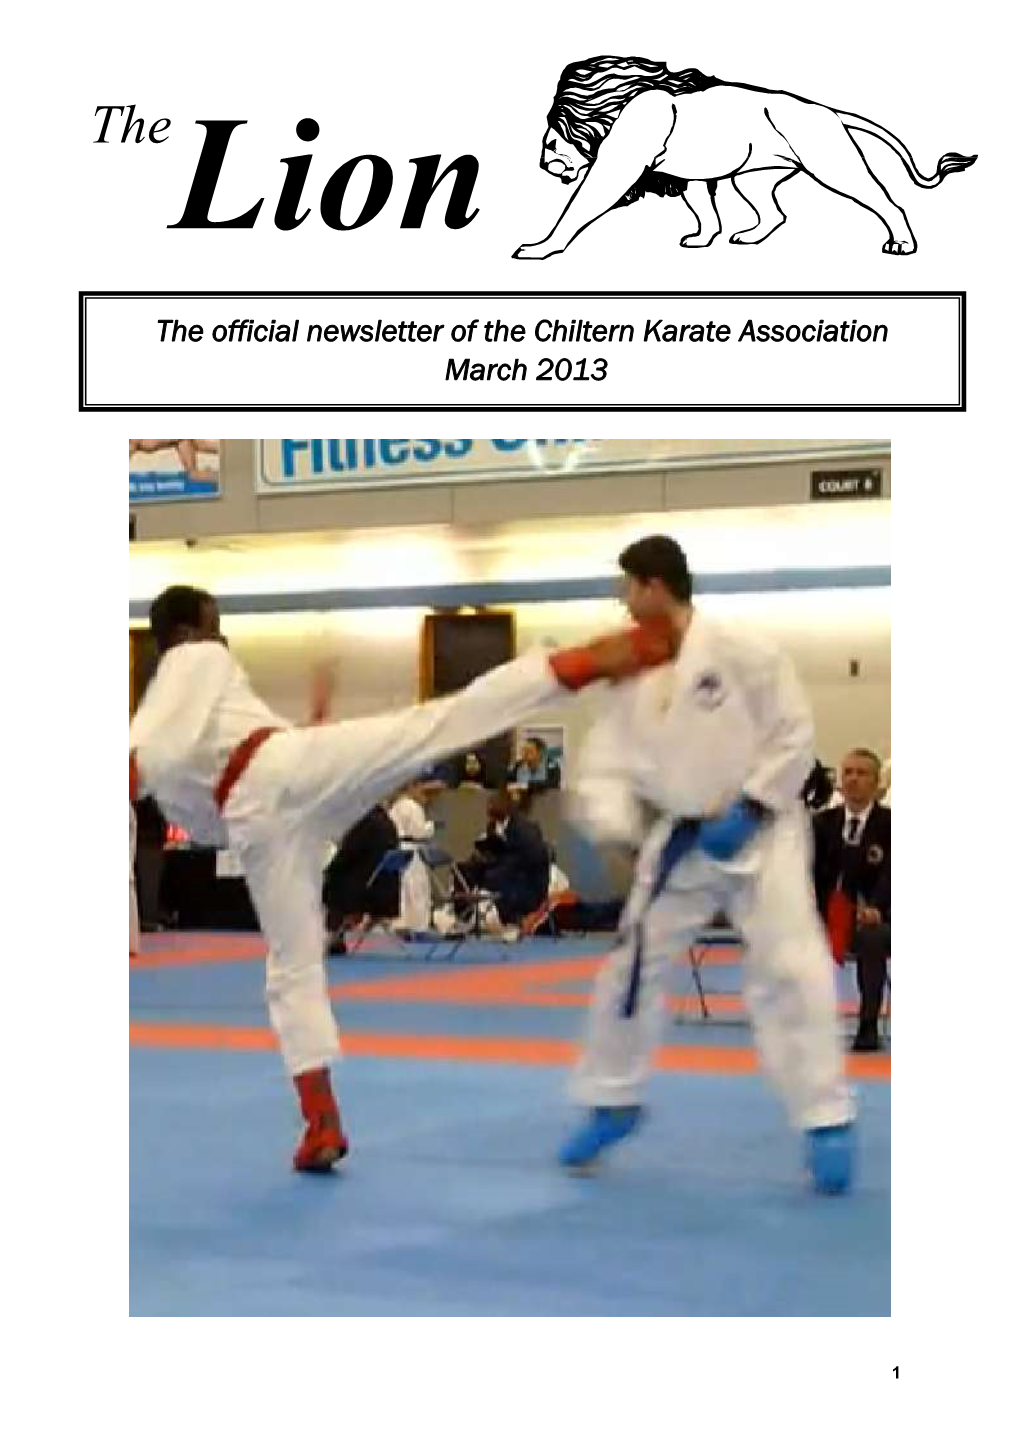 The Official Newsletter of the Chiltern Karate Association March 2013